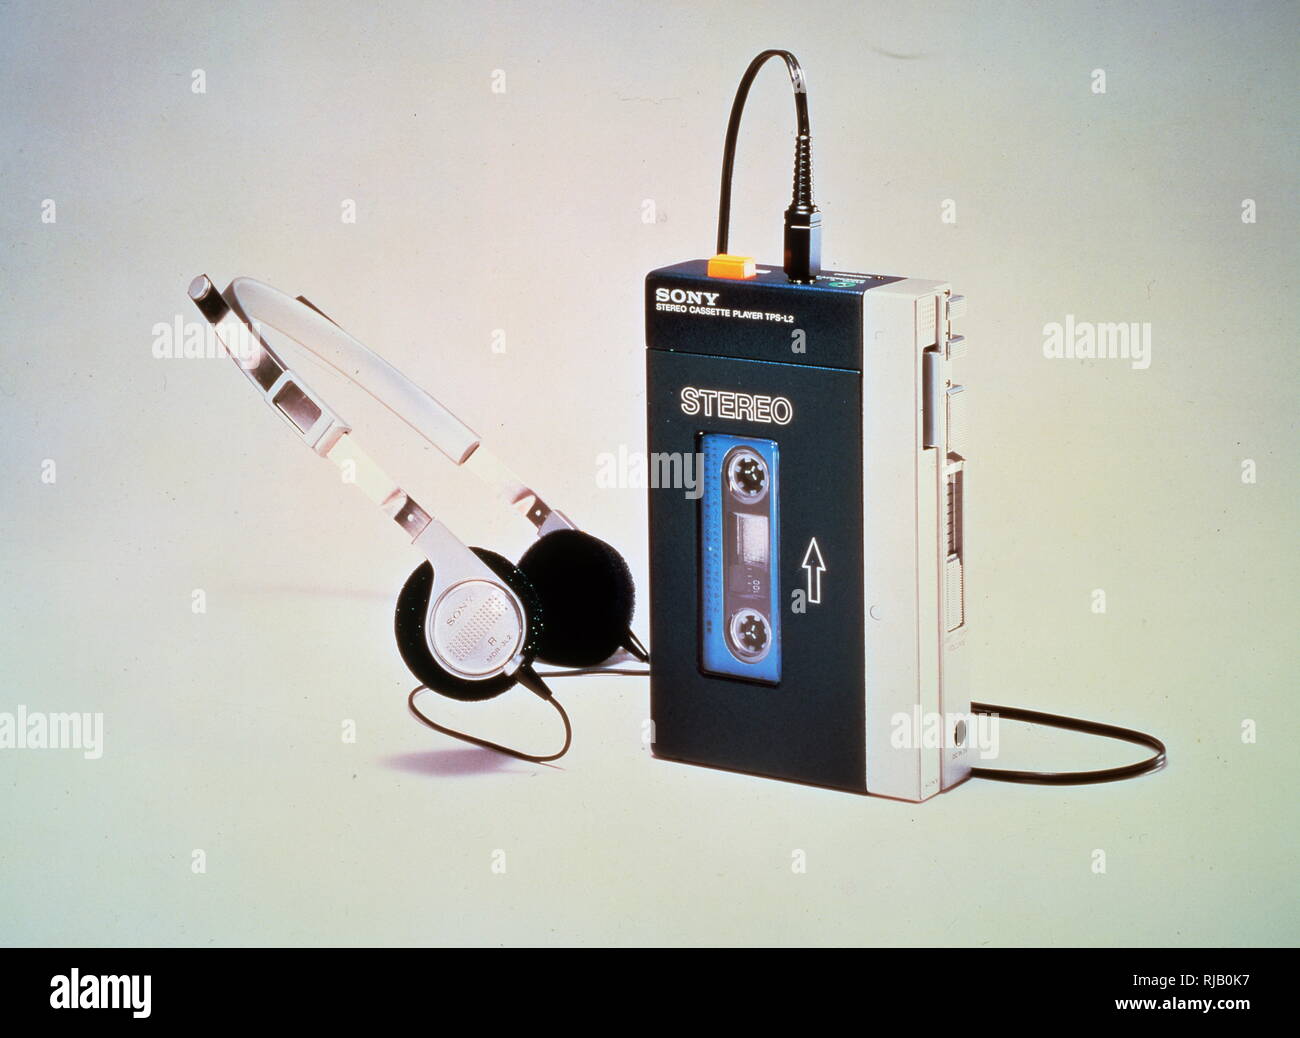 British model of the Sony stereo cassette player TPS-L2; the first low-cost portable stereo, launched July 1, 1979. In June 1980, it was introduced in the U.S. In the UK, it came with stereo playback and two mini headphone jacks, permitting two people to listen at the same time. The TPS-L2 was created by Akio Morita, Masaru Ibuka (the co-founders of SONY) and Kozo Ohsone. Stock Photo